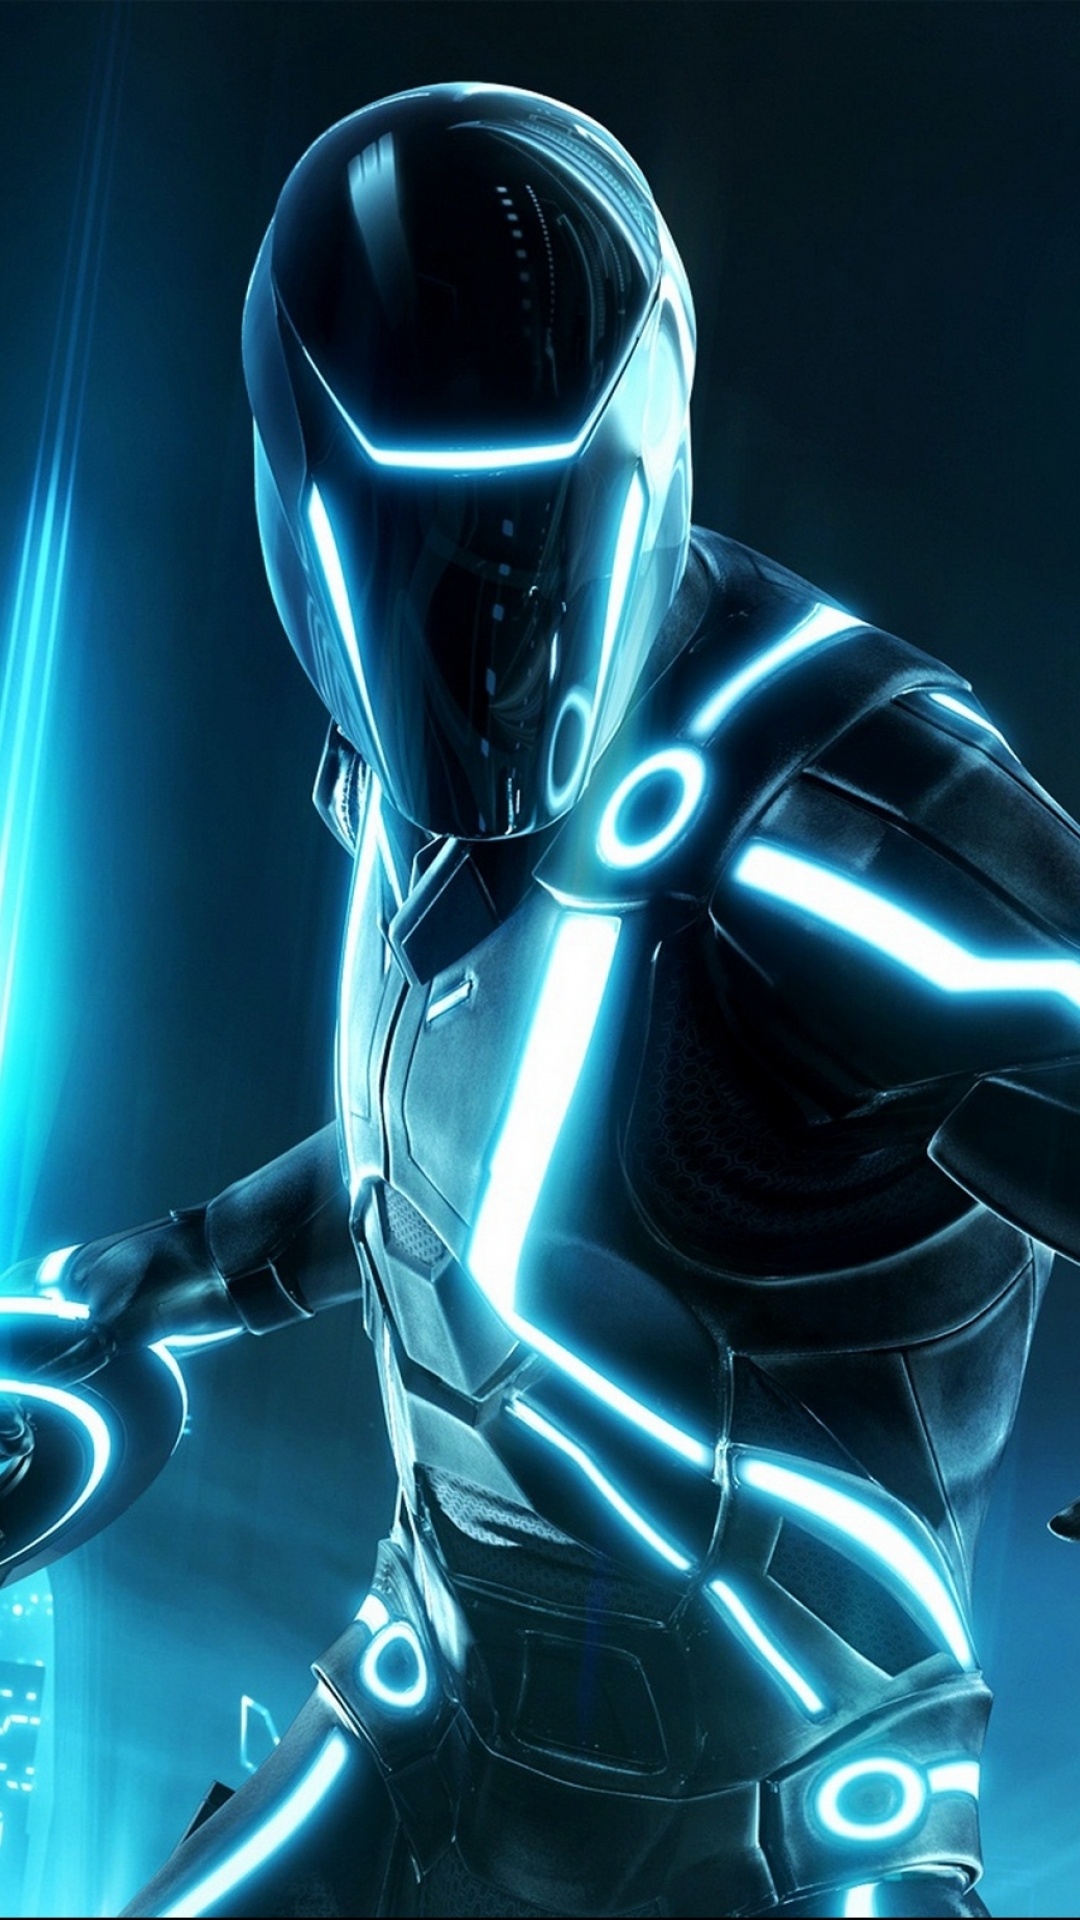 Tron (Movie): Bruce Boxleitner reprised his roles as Alan Bradley and Tron. 1080x1920 Full HD Background.